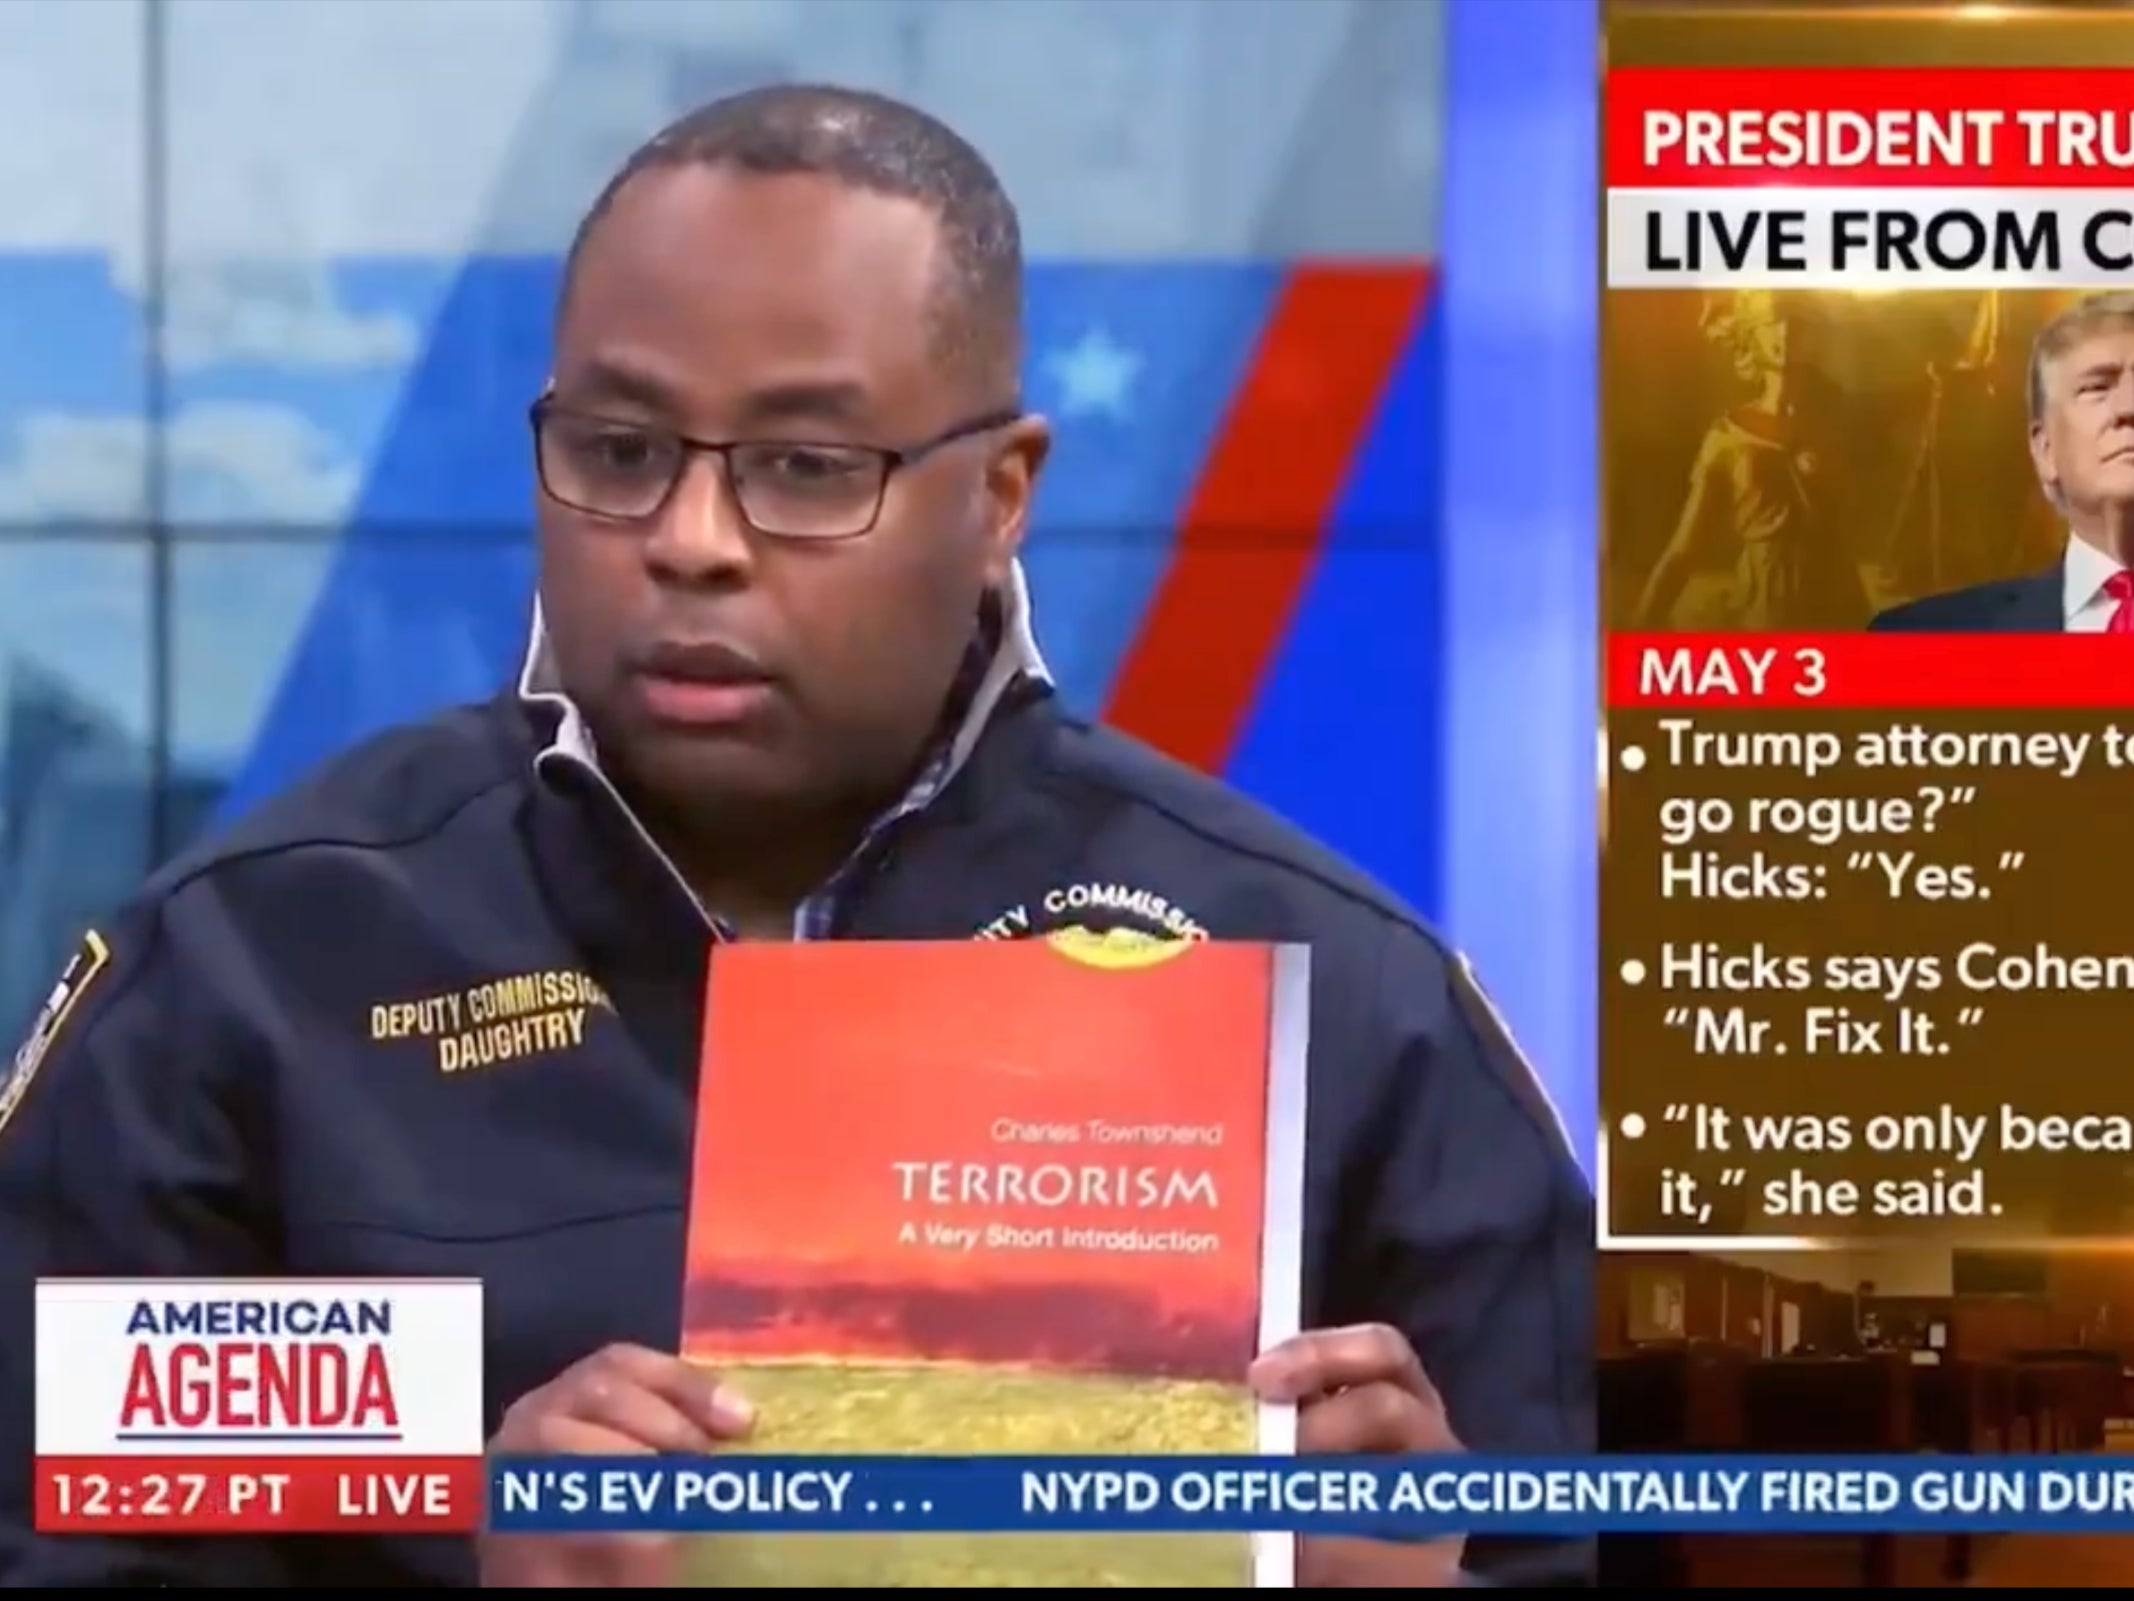 NYPD Deputy Commissioner shows terrorism book as proof of ‘outside agitators’ on Columbia’s campus